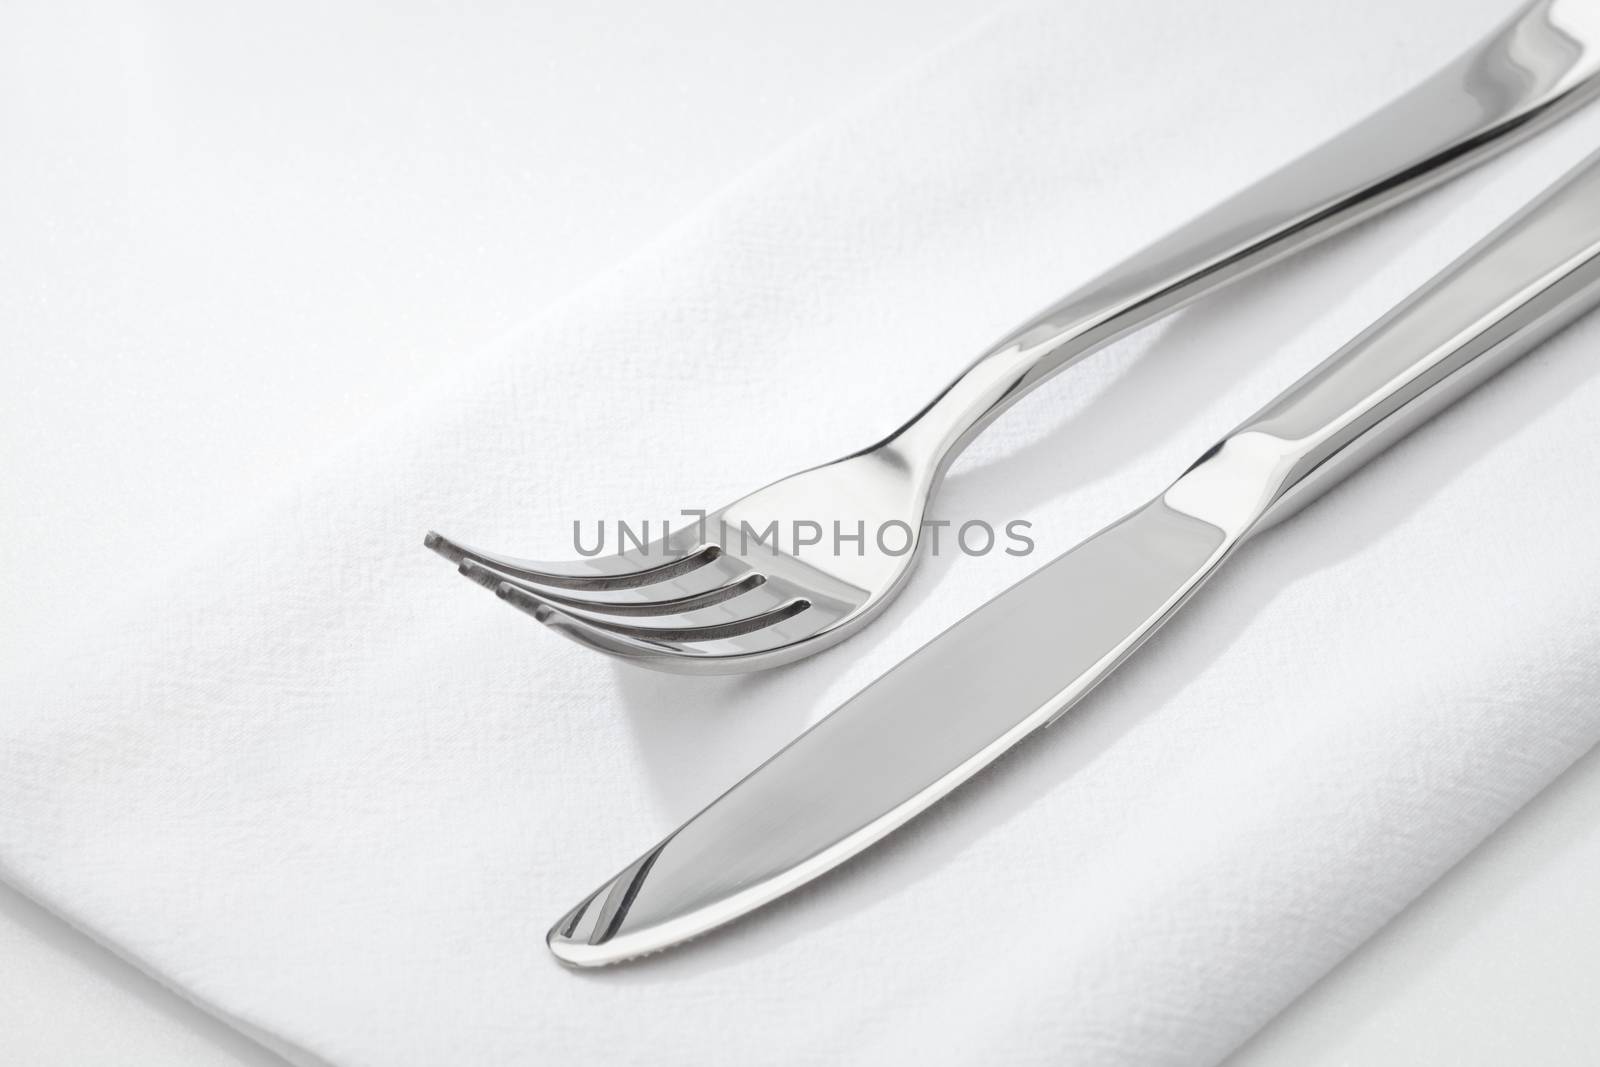 close up view of nice steel fork and knife on white napkin